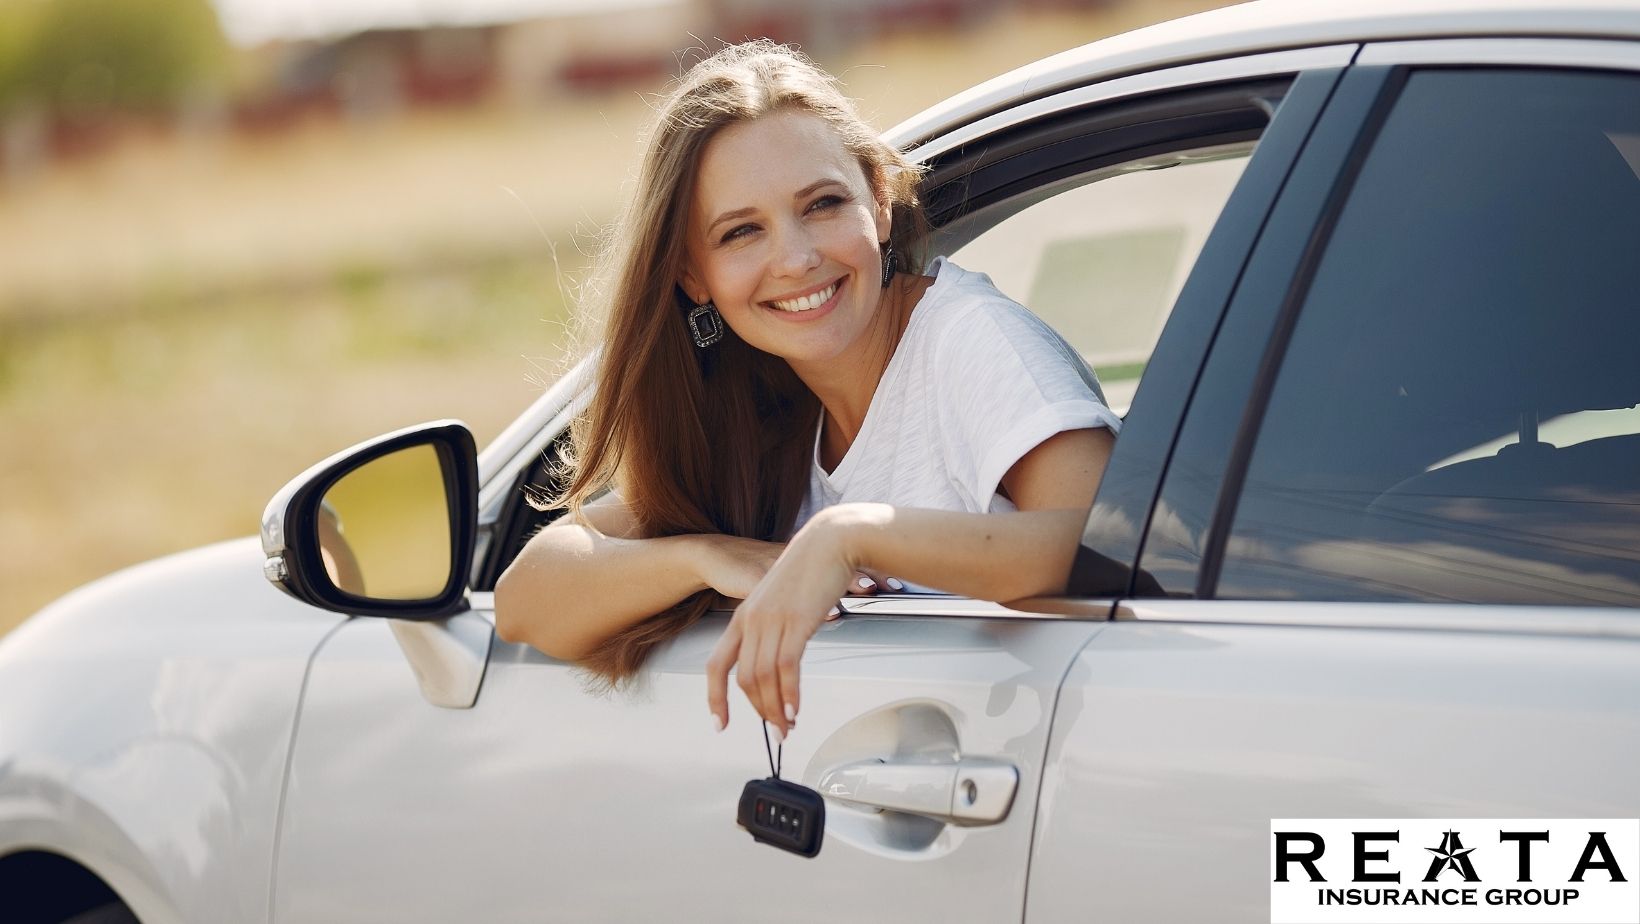 When Do I Need to Notify My Insurance Company of a New Car Purchase in Texas?